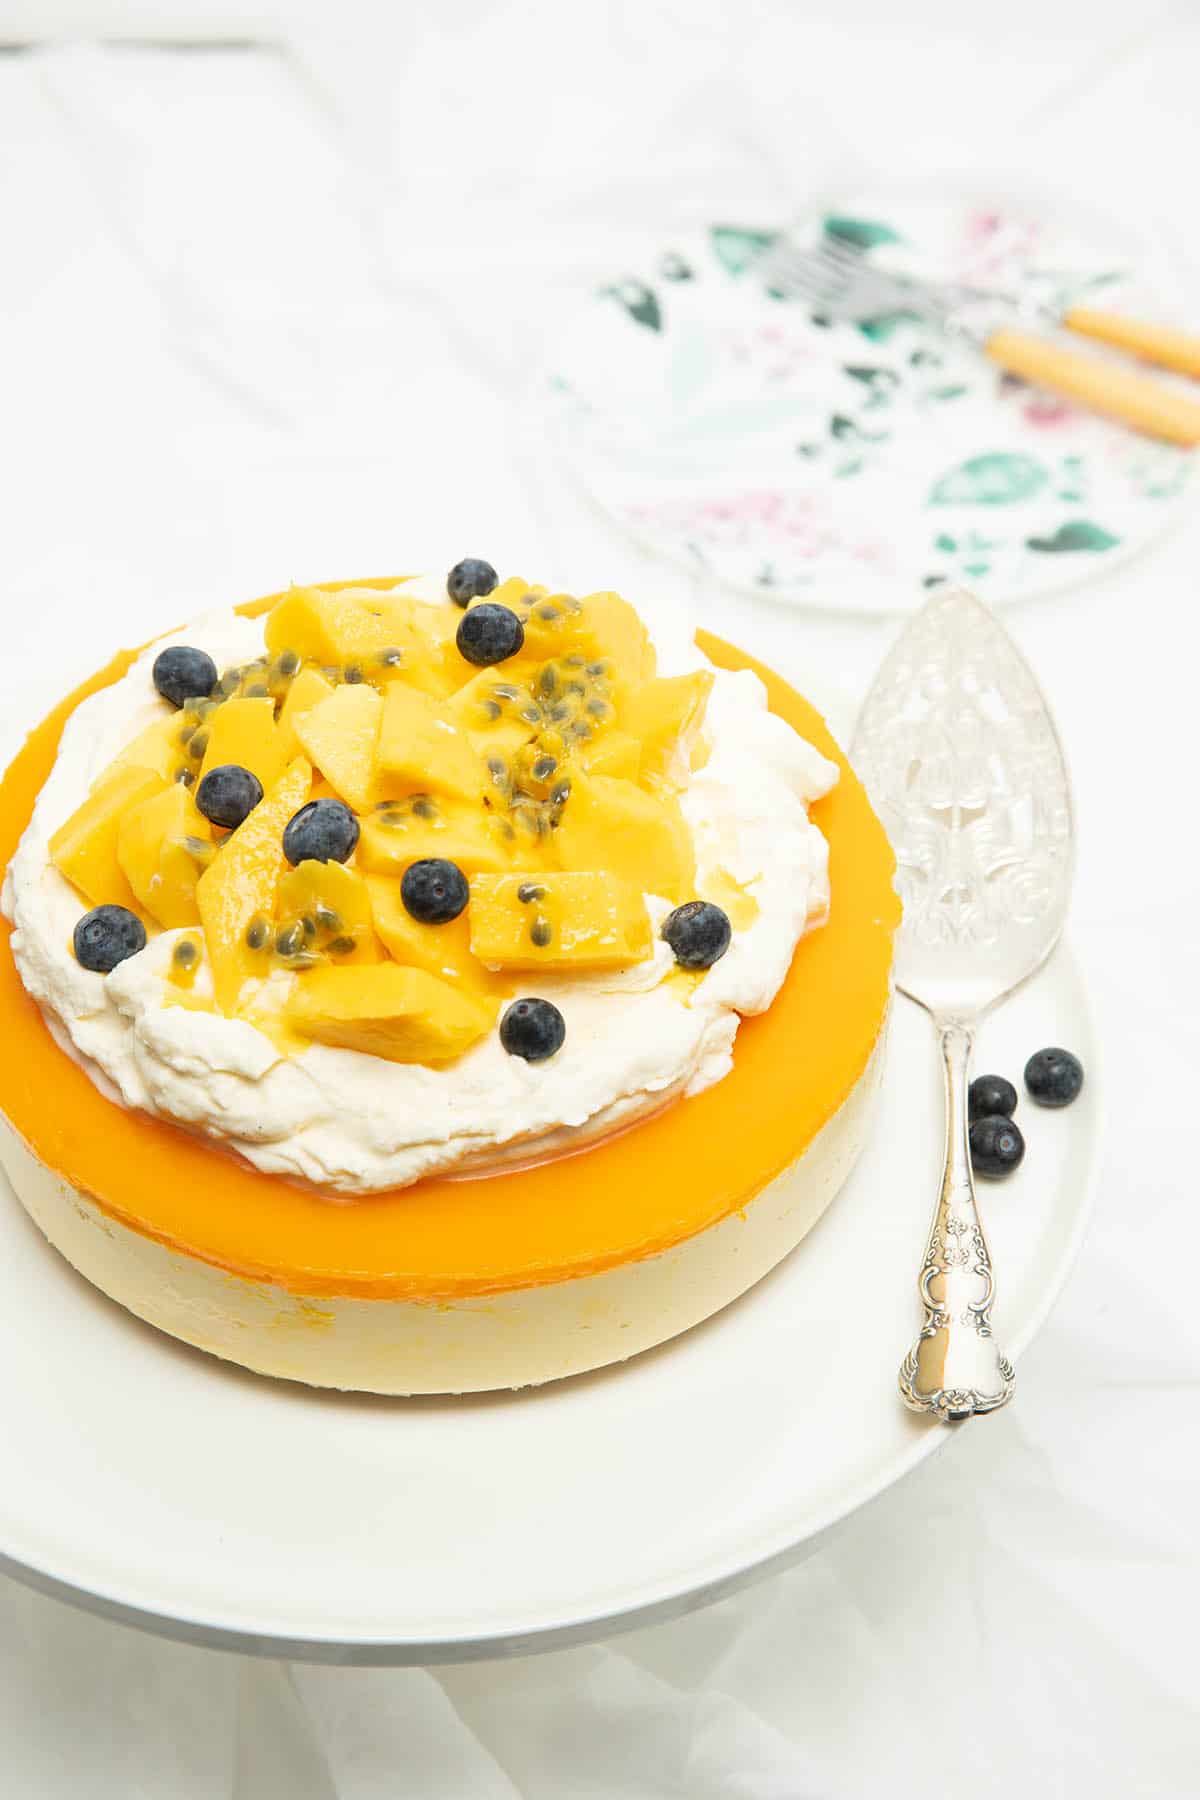 Whole Thermomix Mango Cheesecake Layered with cream and fruit on top, white background.